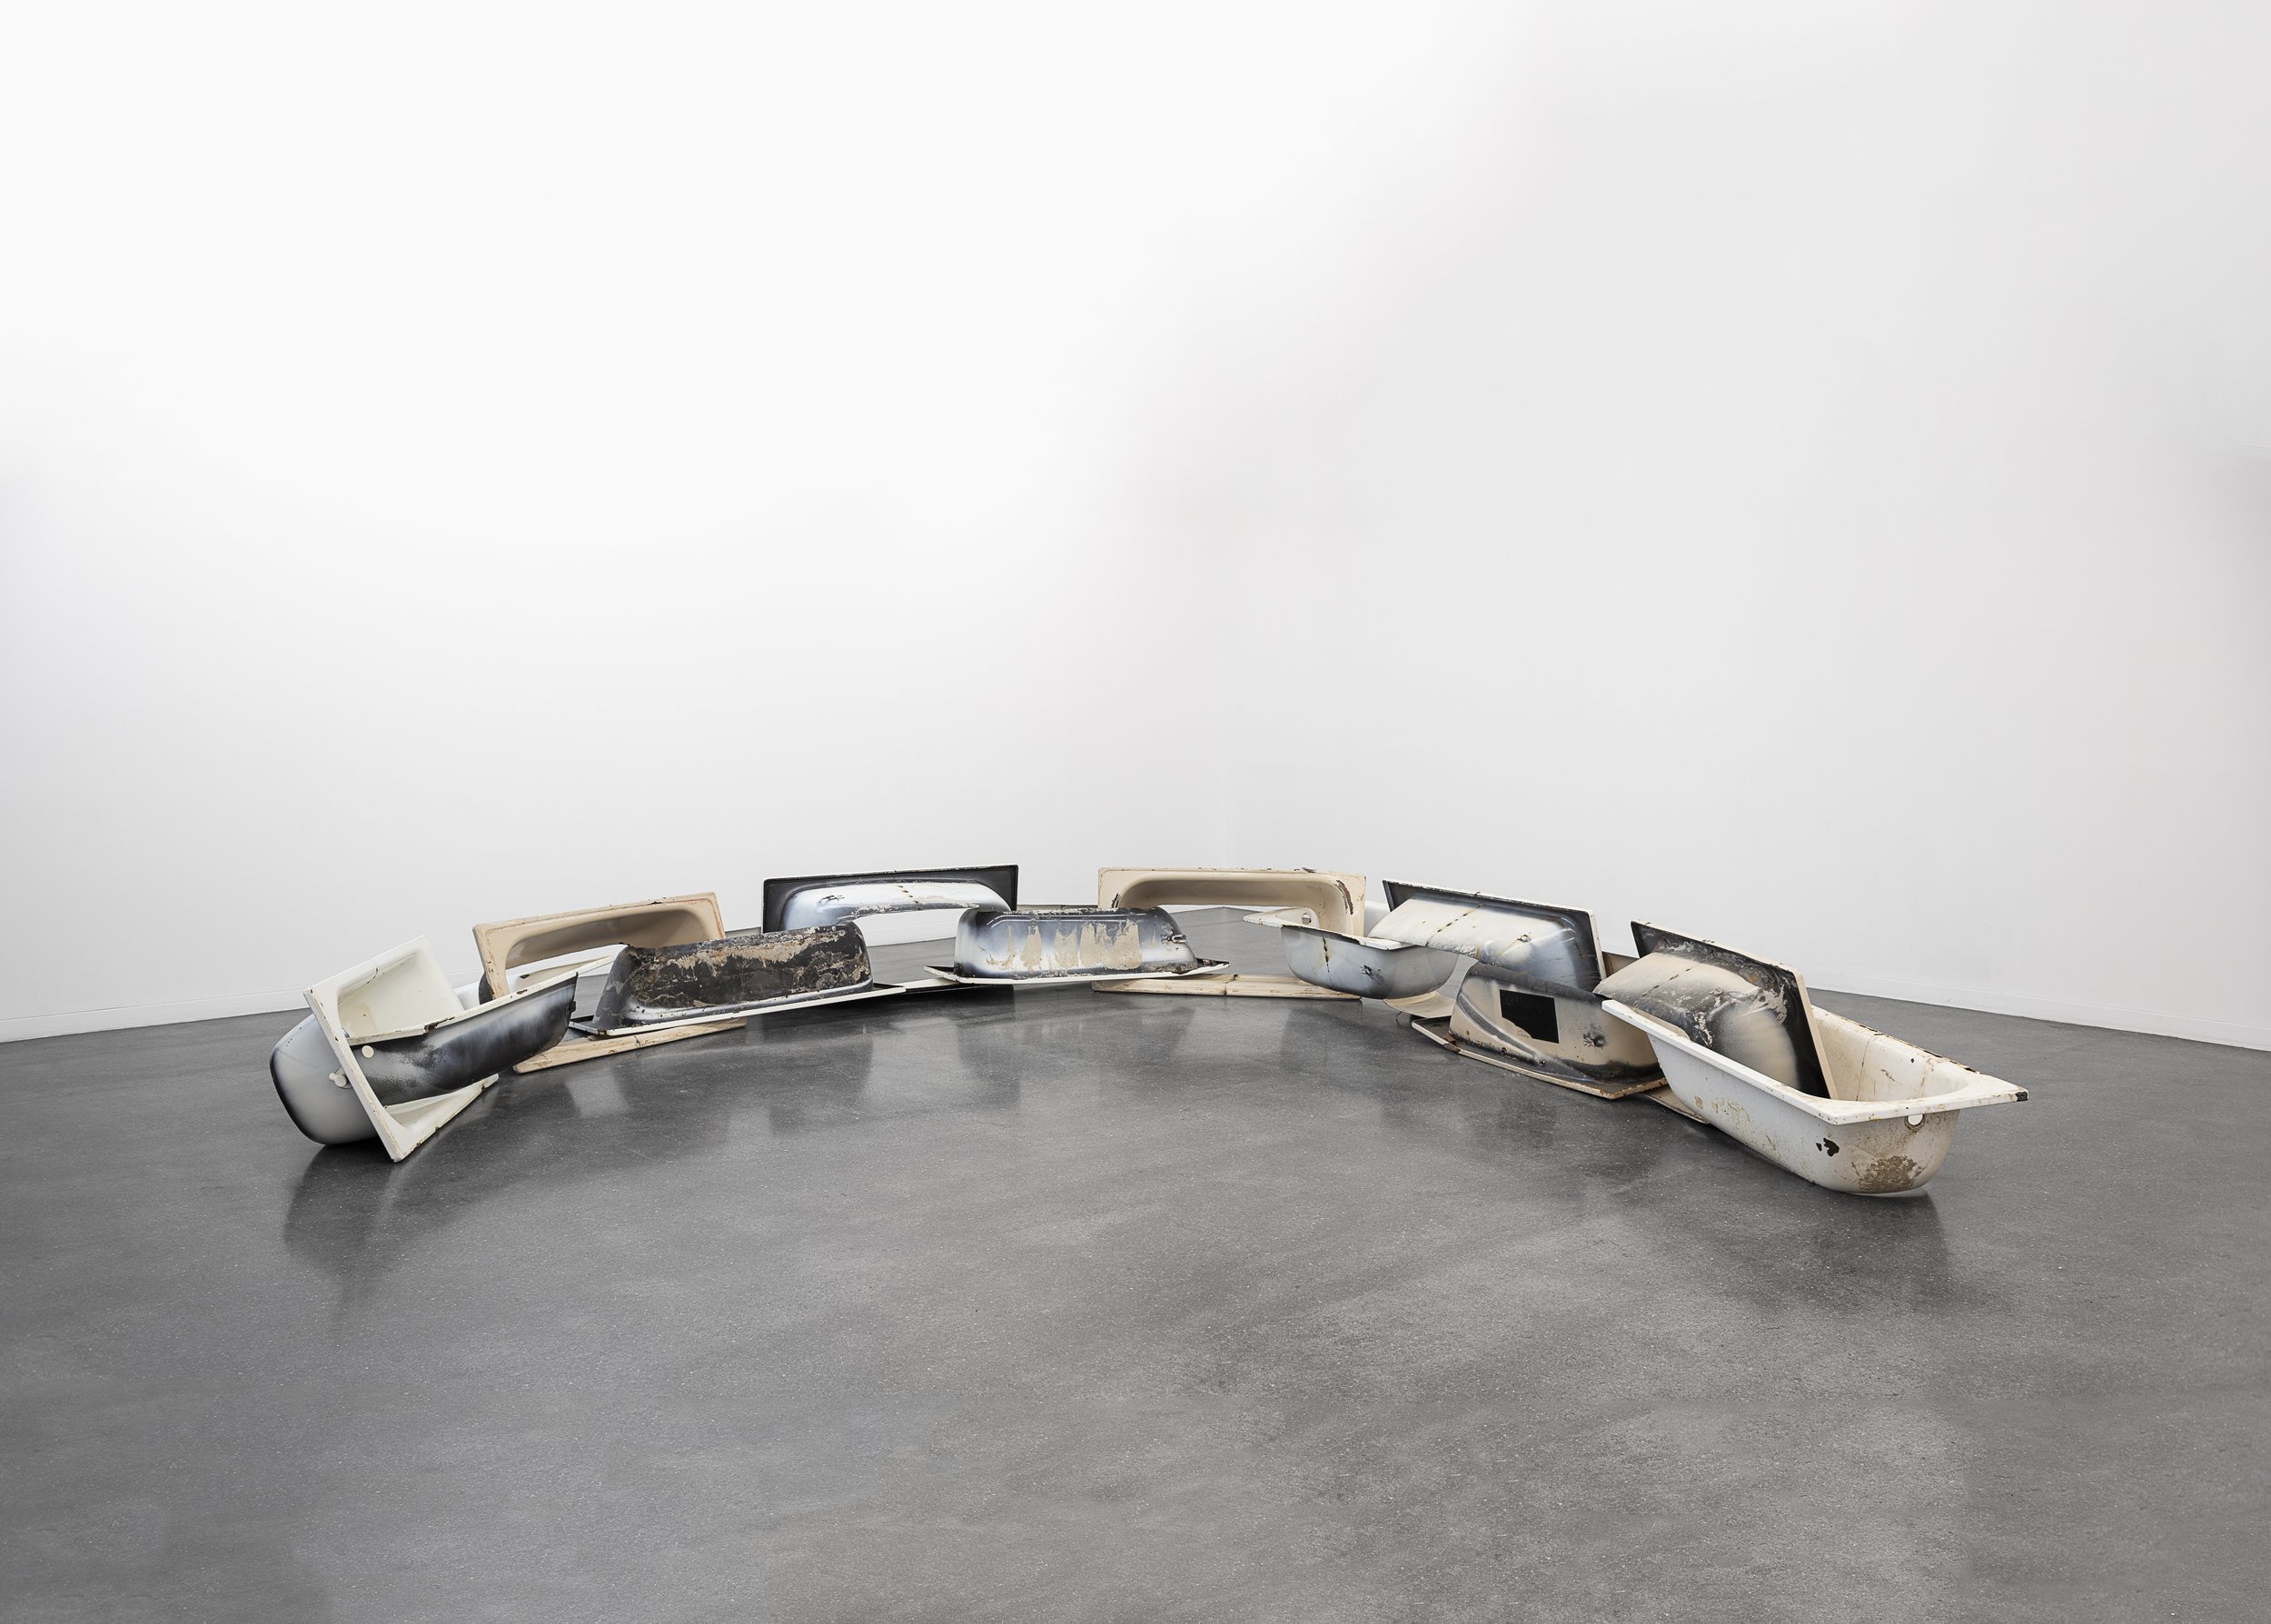  Bat-Ami Rivlin  Untitled (12 tubs) , 2022 twelve tubs dimensions variable to installation Photos by Sergio Acosta via Tenerife Espacio de las Artes, Tenerife, Spain from the exhibition  COLAPSO  on view   02 July - 18 September 2022 BR48 